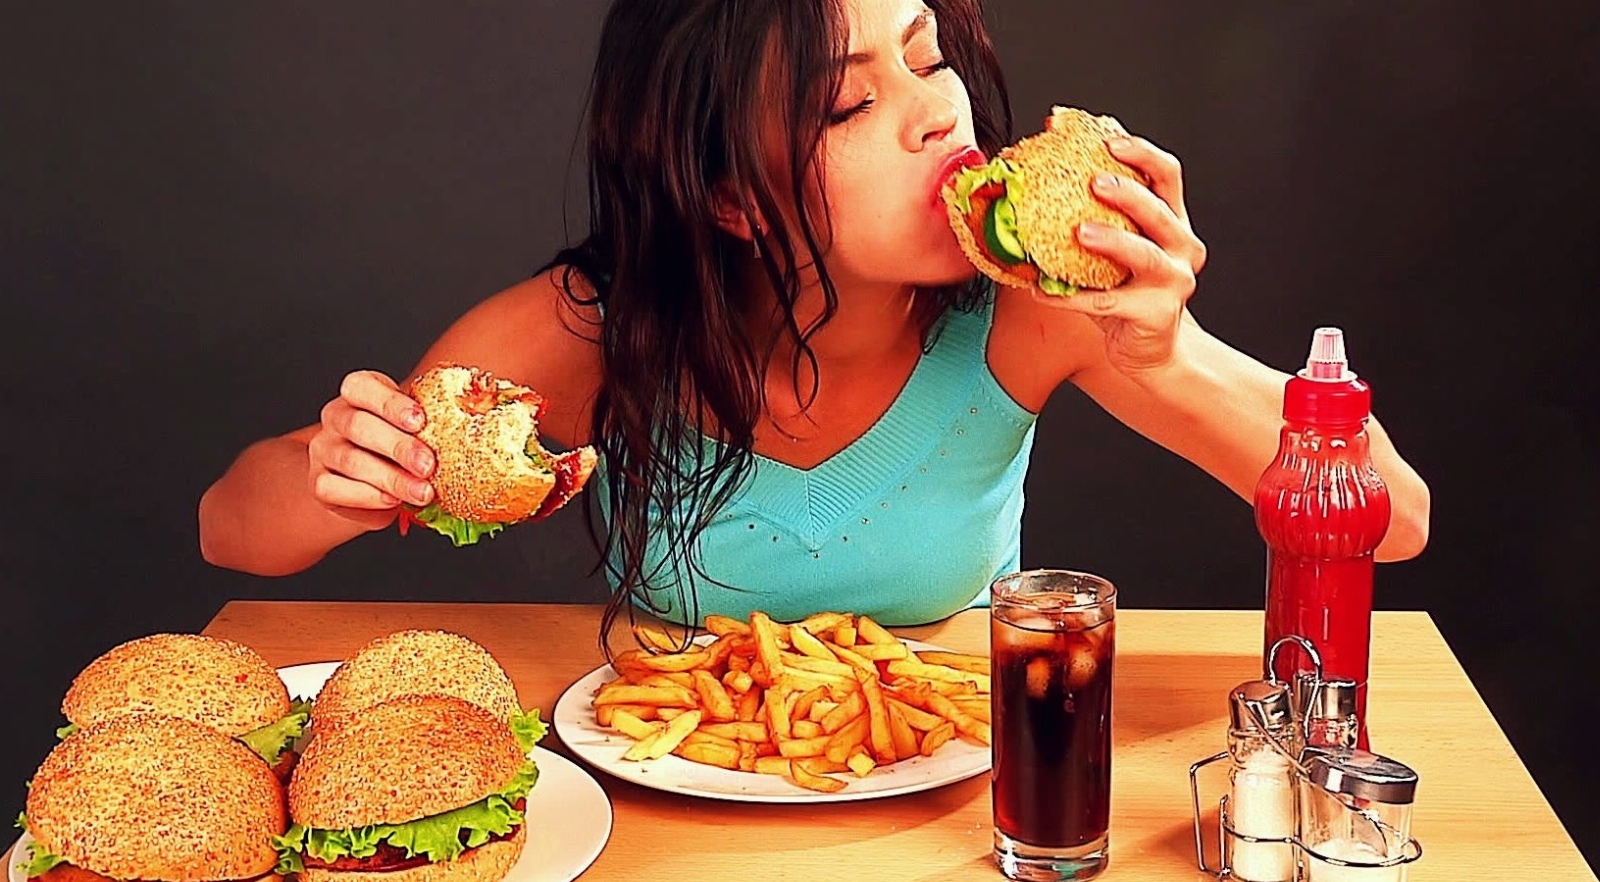 -woman-eating-fast-food-time-lapse1-e1479904734596.jpg